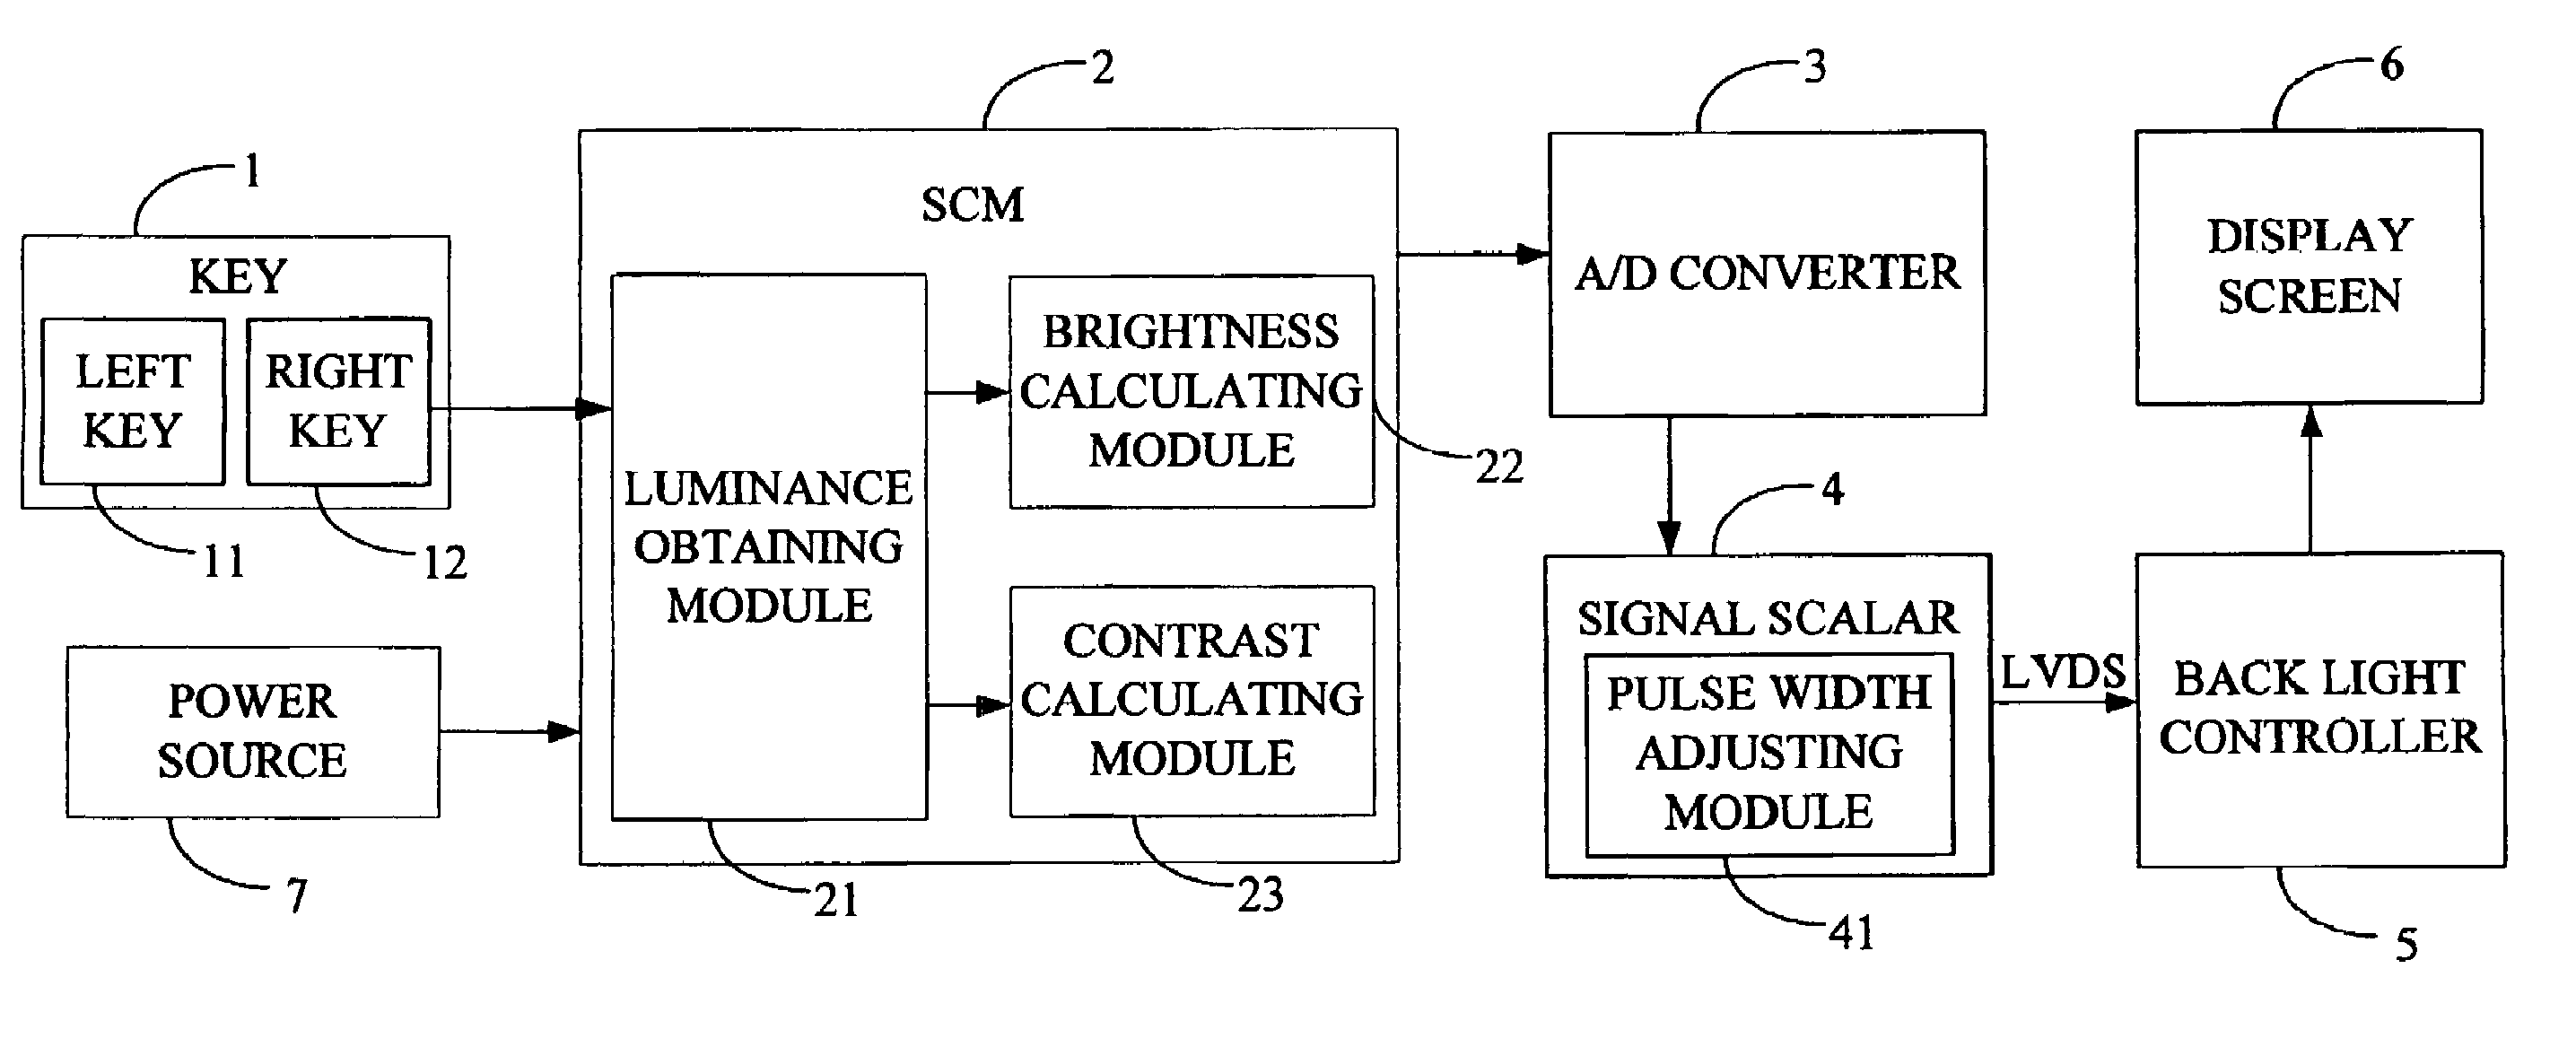 Method for simultaneously adjusting brightness and contrast of a display